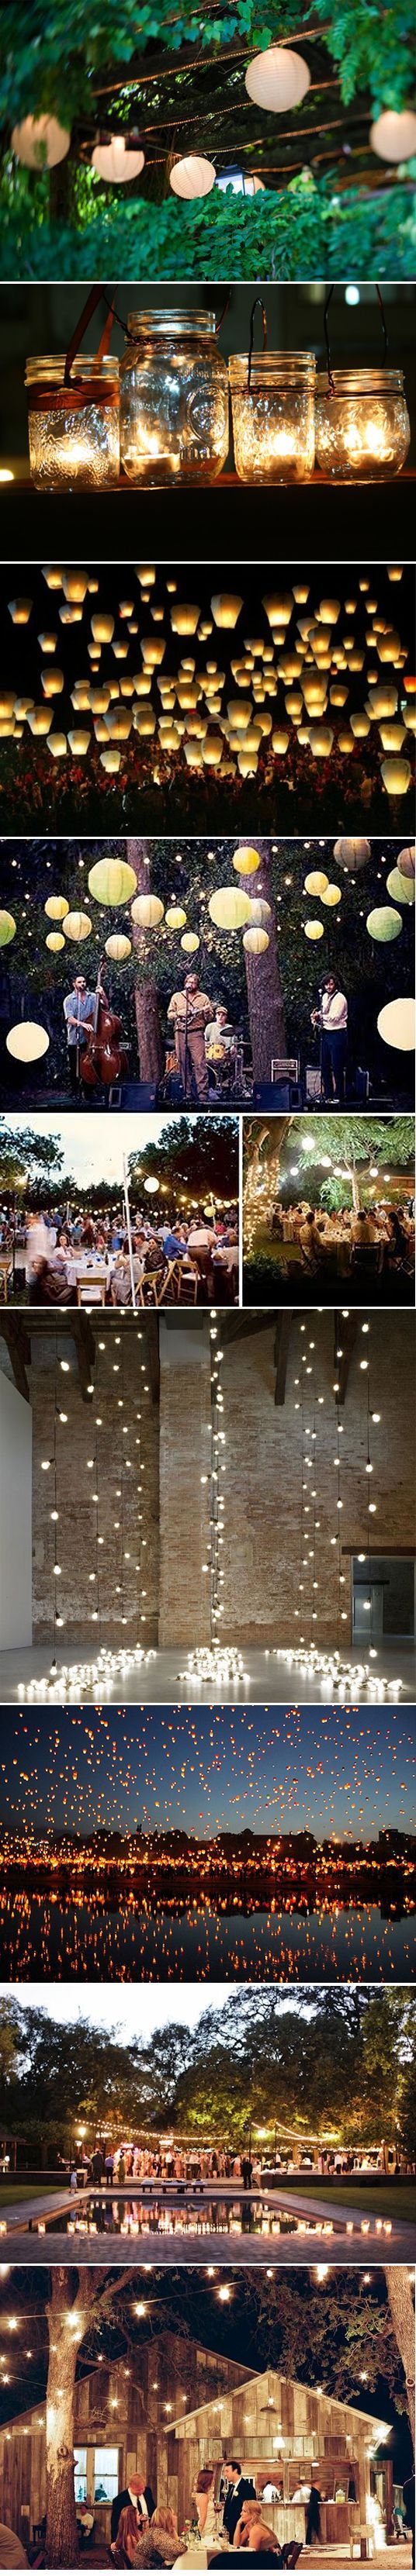 DIY lights and lanterns for outdoors